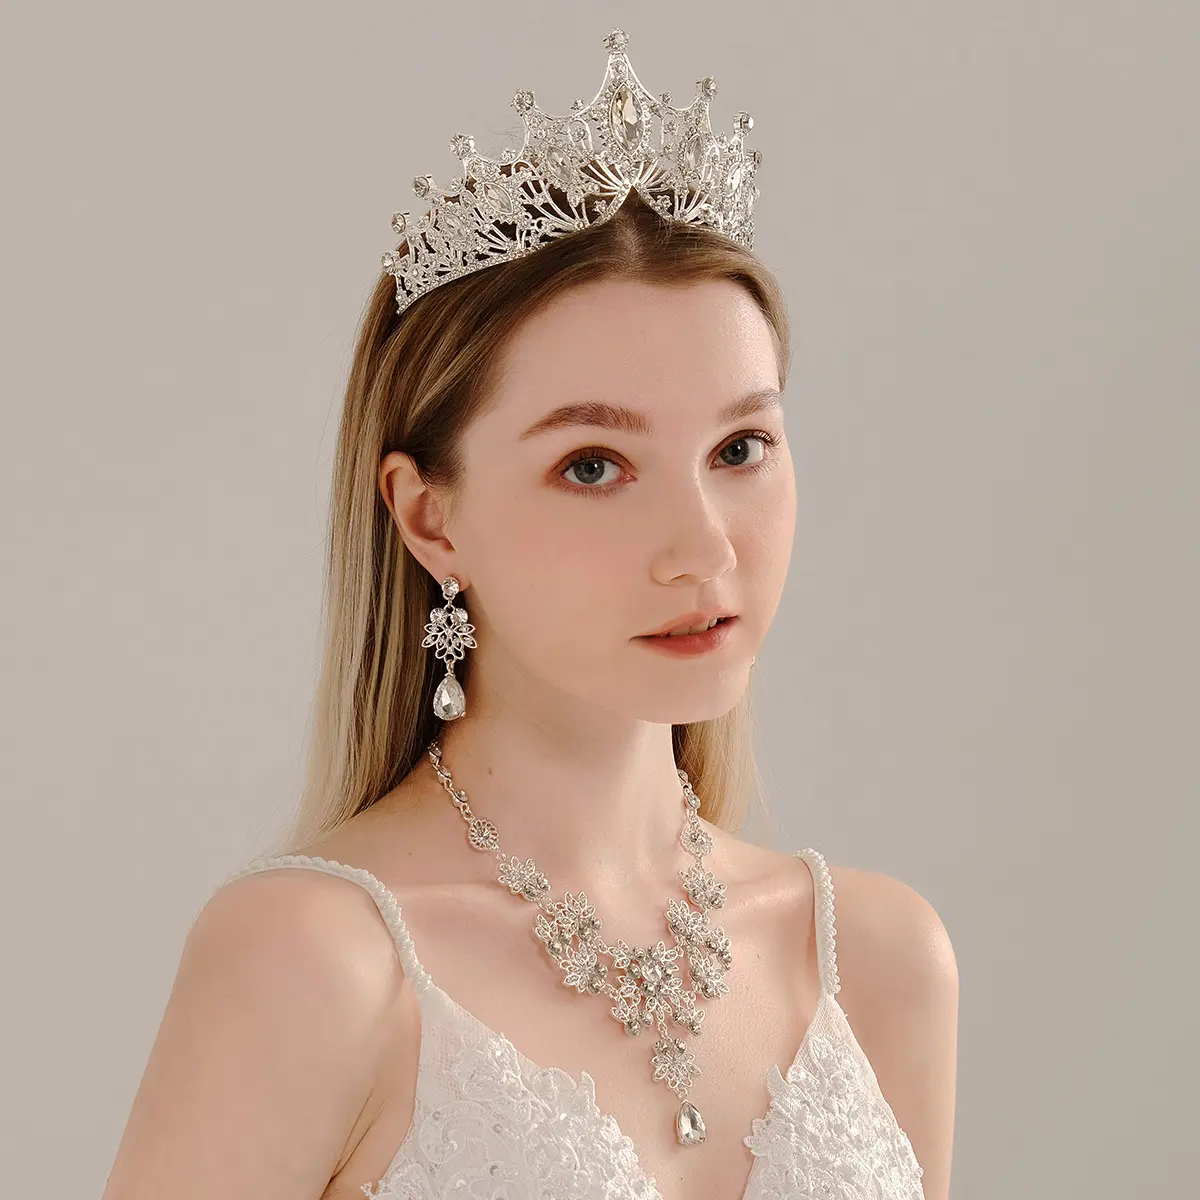 Fashion Bridal Jewelry Sets Wedding Crown Necklace With Earrings Pearl Crystal Tiara And Crowns Hair Ornaments Women